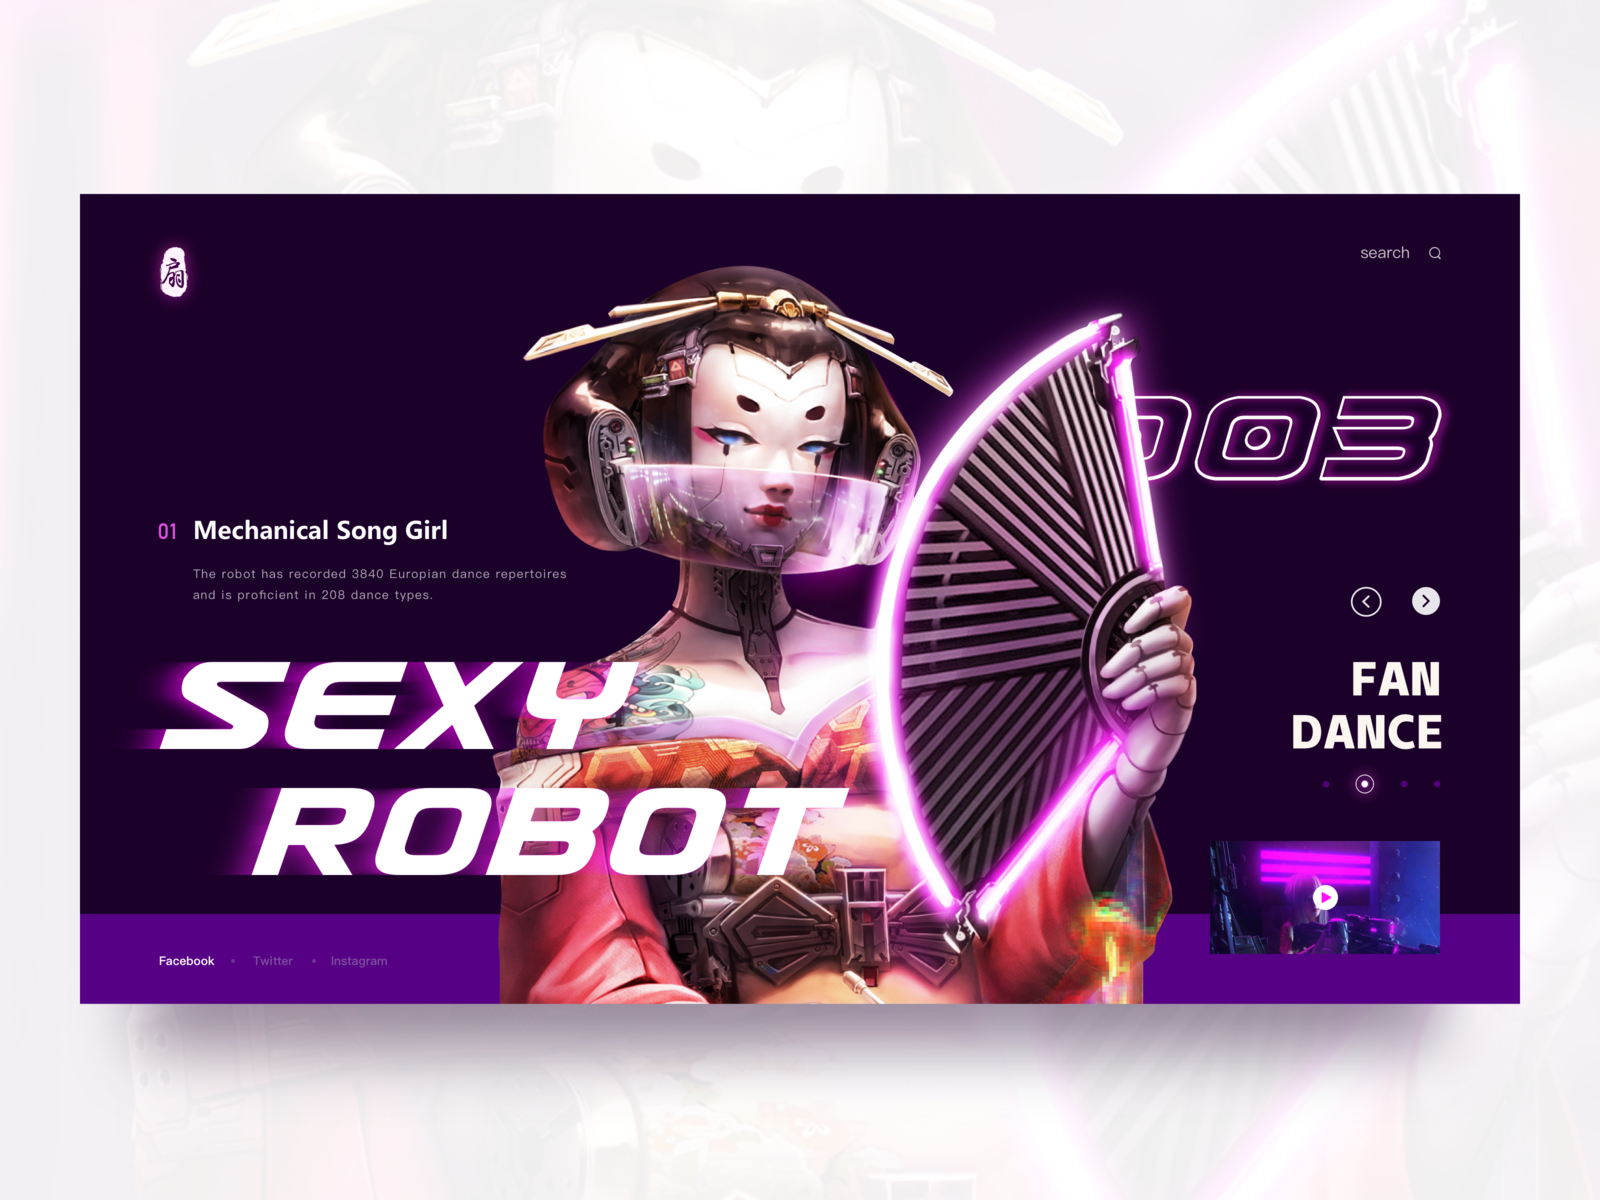 Sexy Robot 03 by SHENGYI_ for UIGREAT Studio on Dribbble